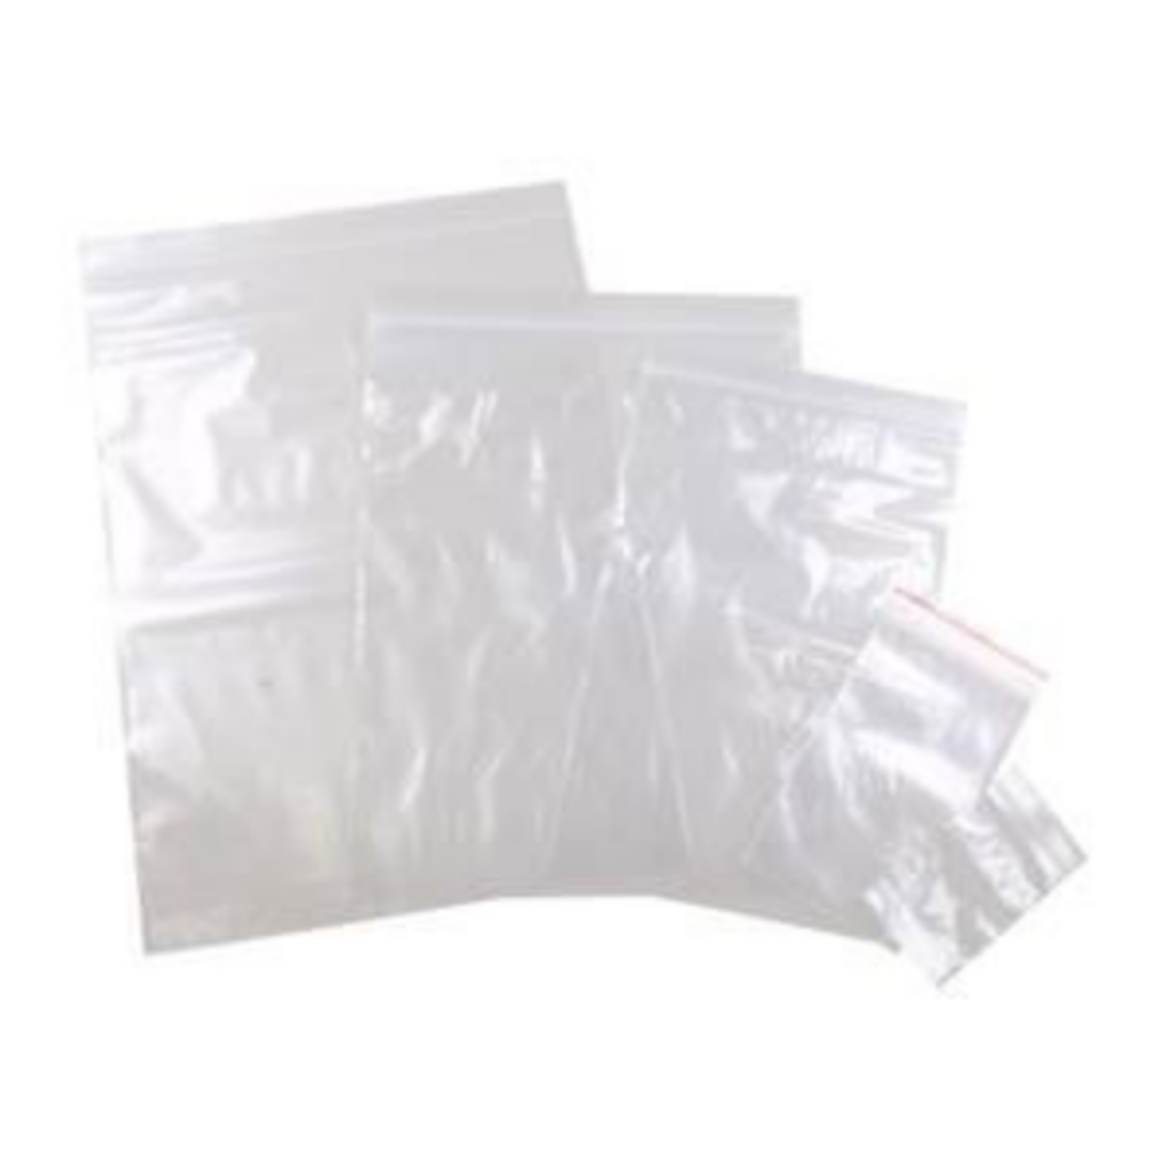 Picture of PLAIN CLIP SEAL PLASTIC BAG SMALL